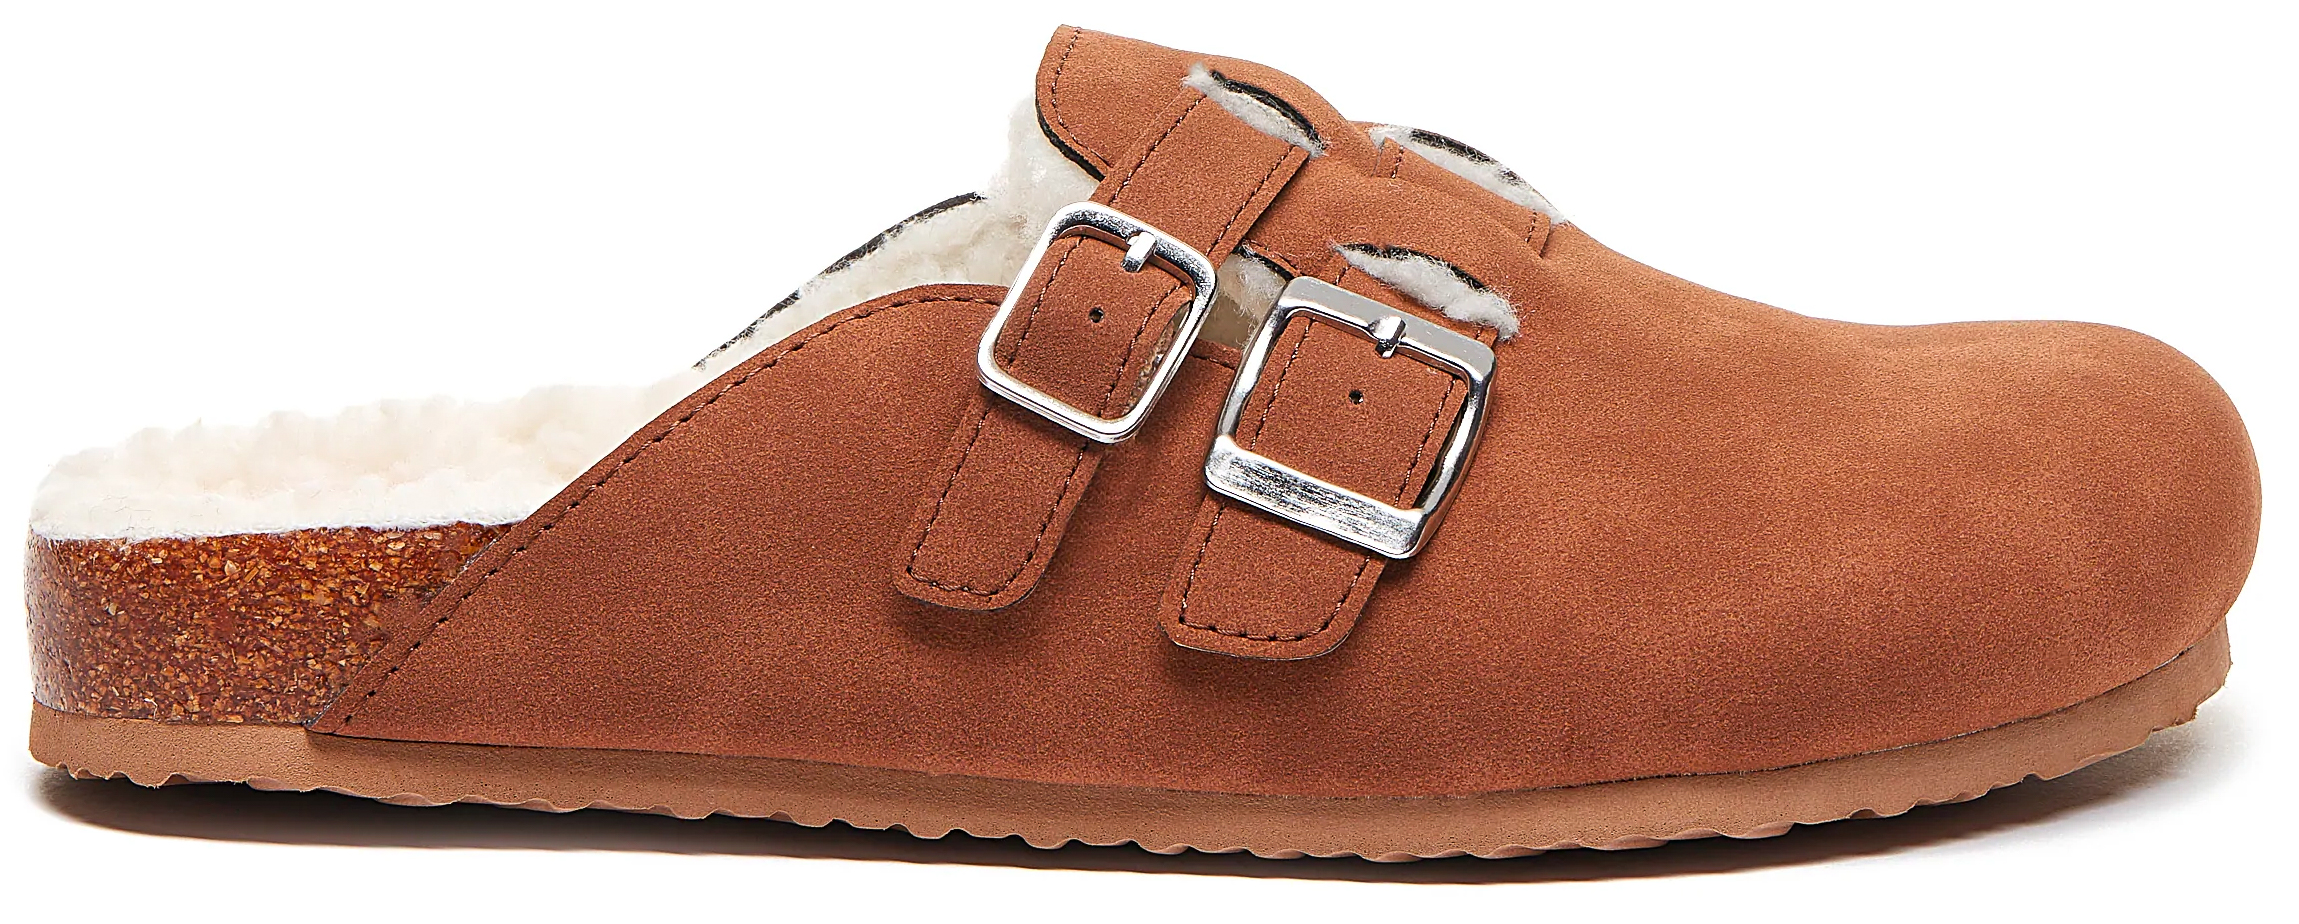 Snap up the best Birkenstock dupes today - Daily Mail